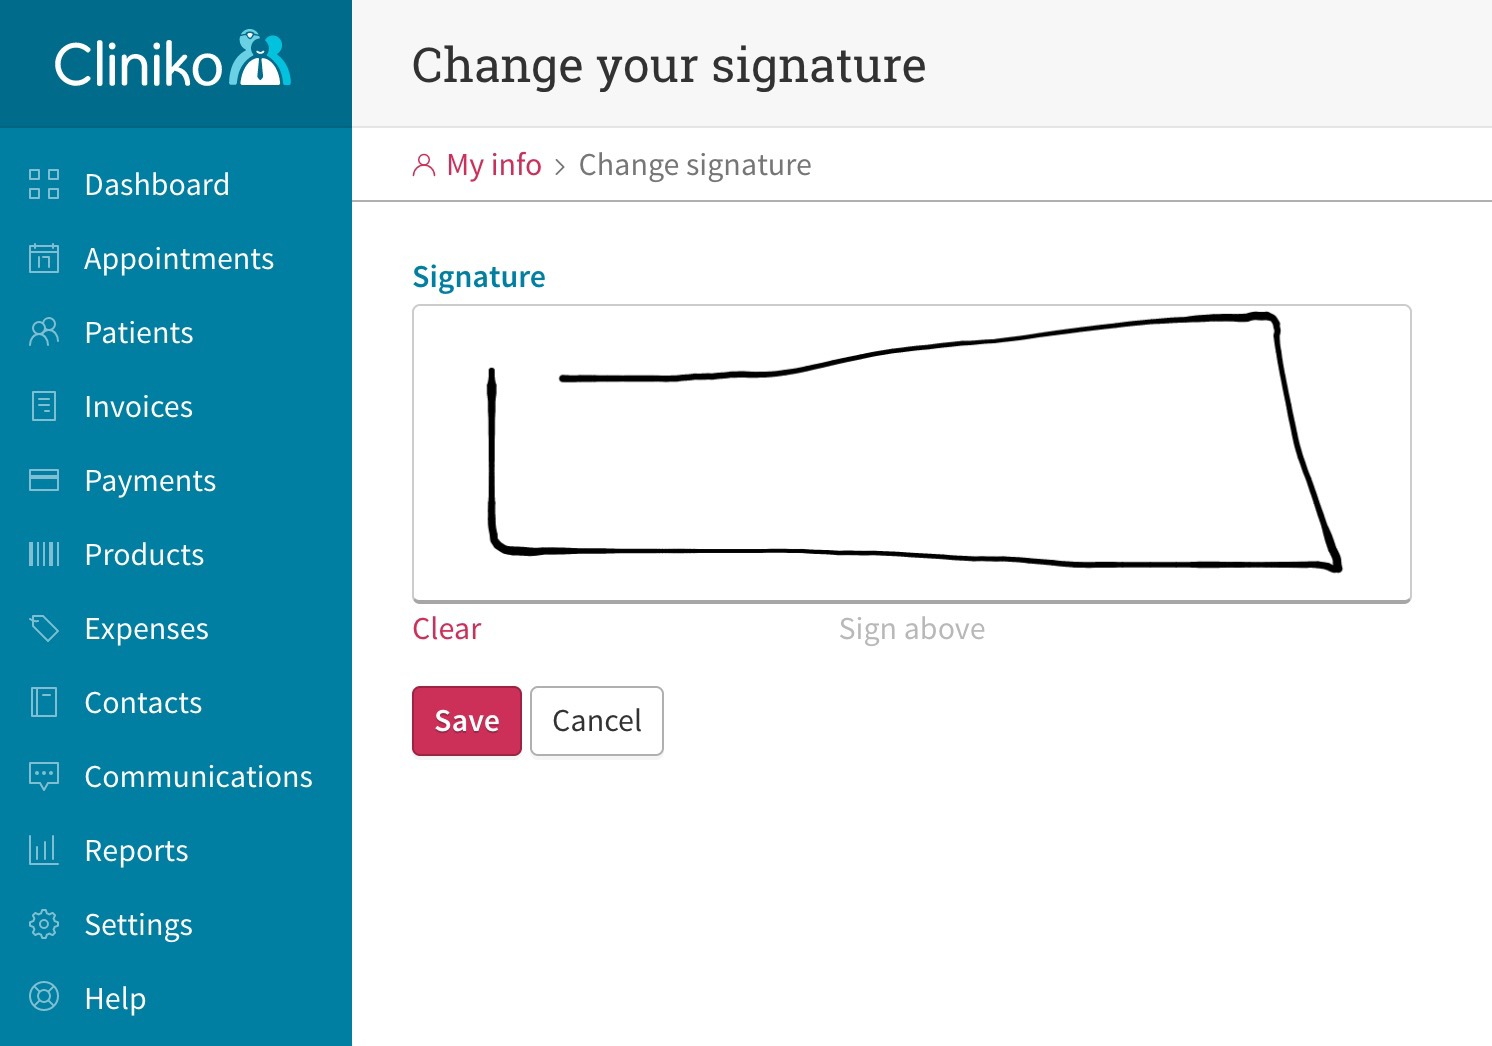 Change your signature page